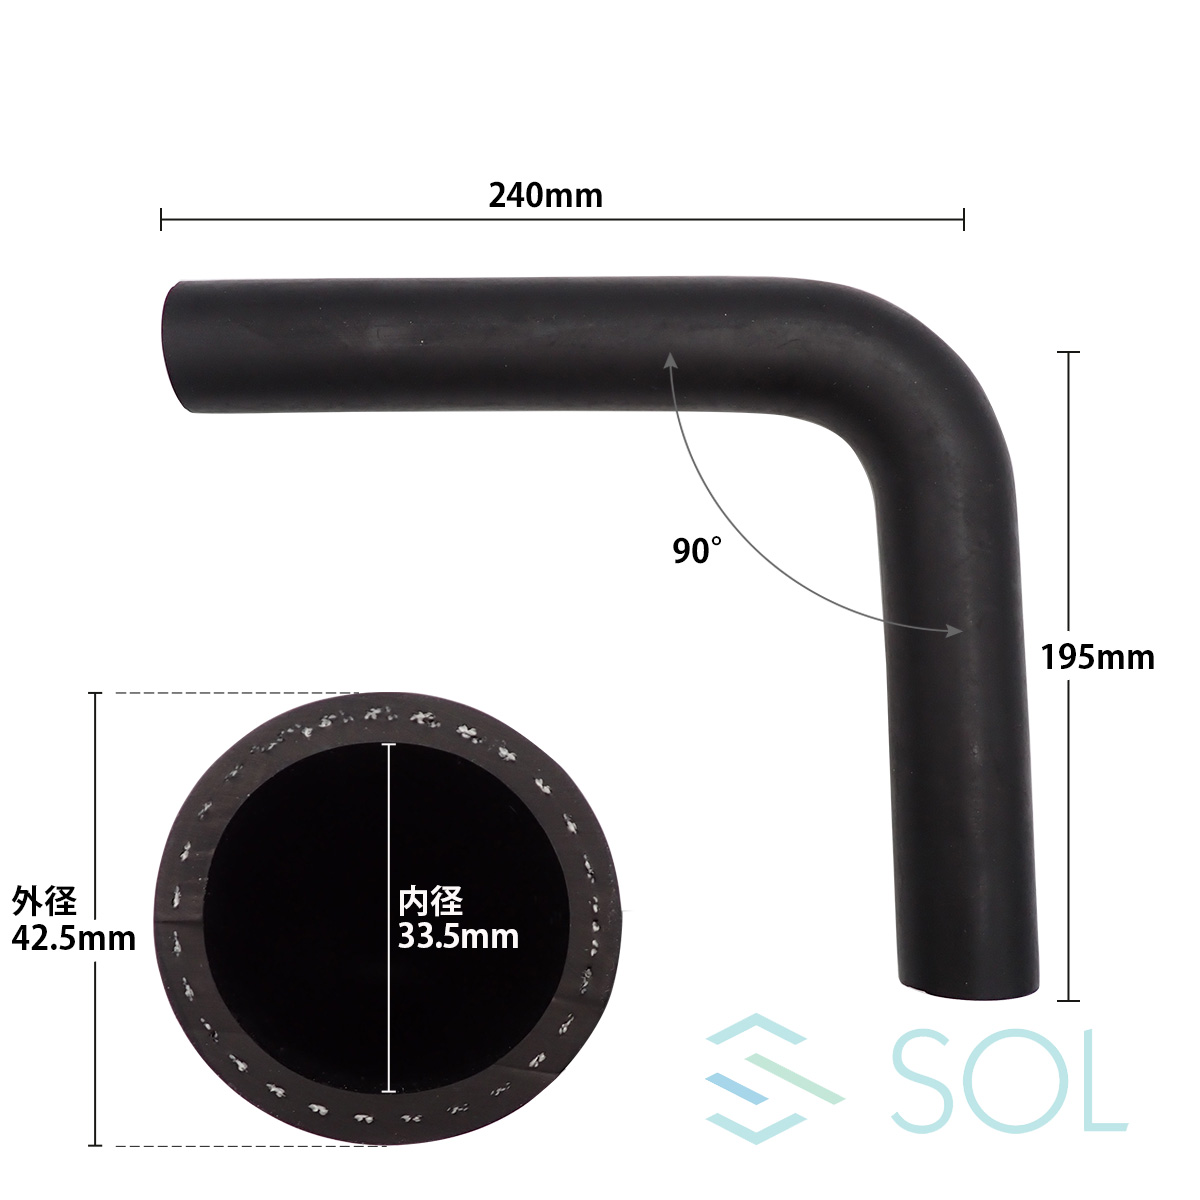  Oono rubber all-purpose radiator hose L type hose inside diameter 33.5mm ON-3001 OHNO L character water heater shipping deadline 18 hour 